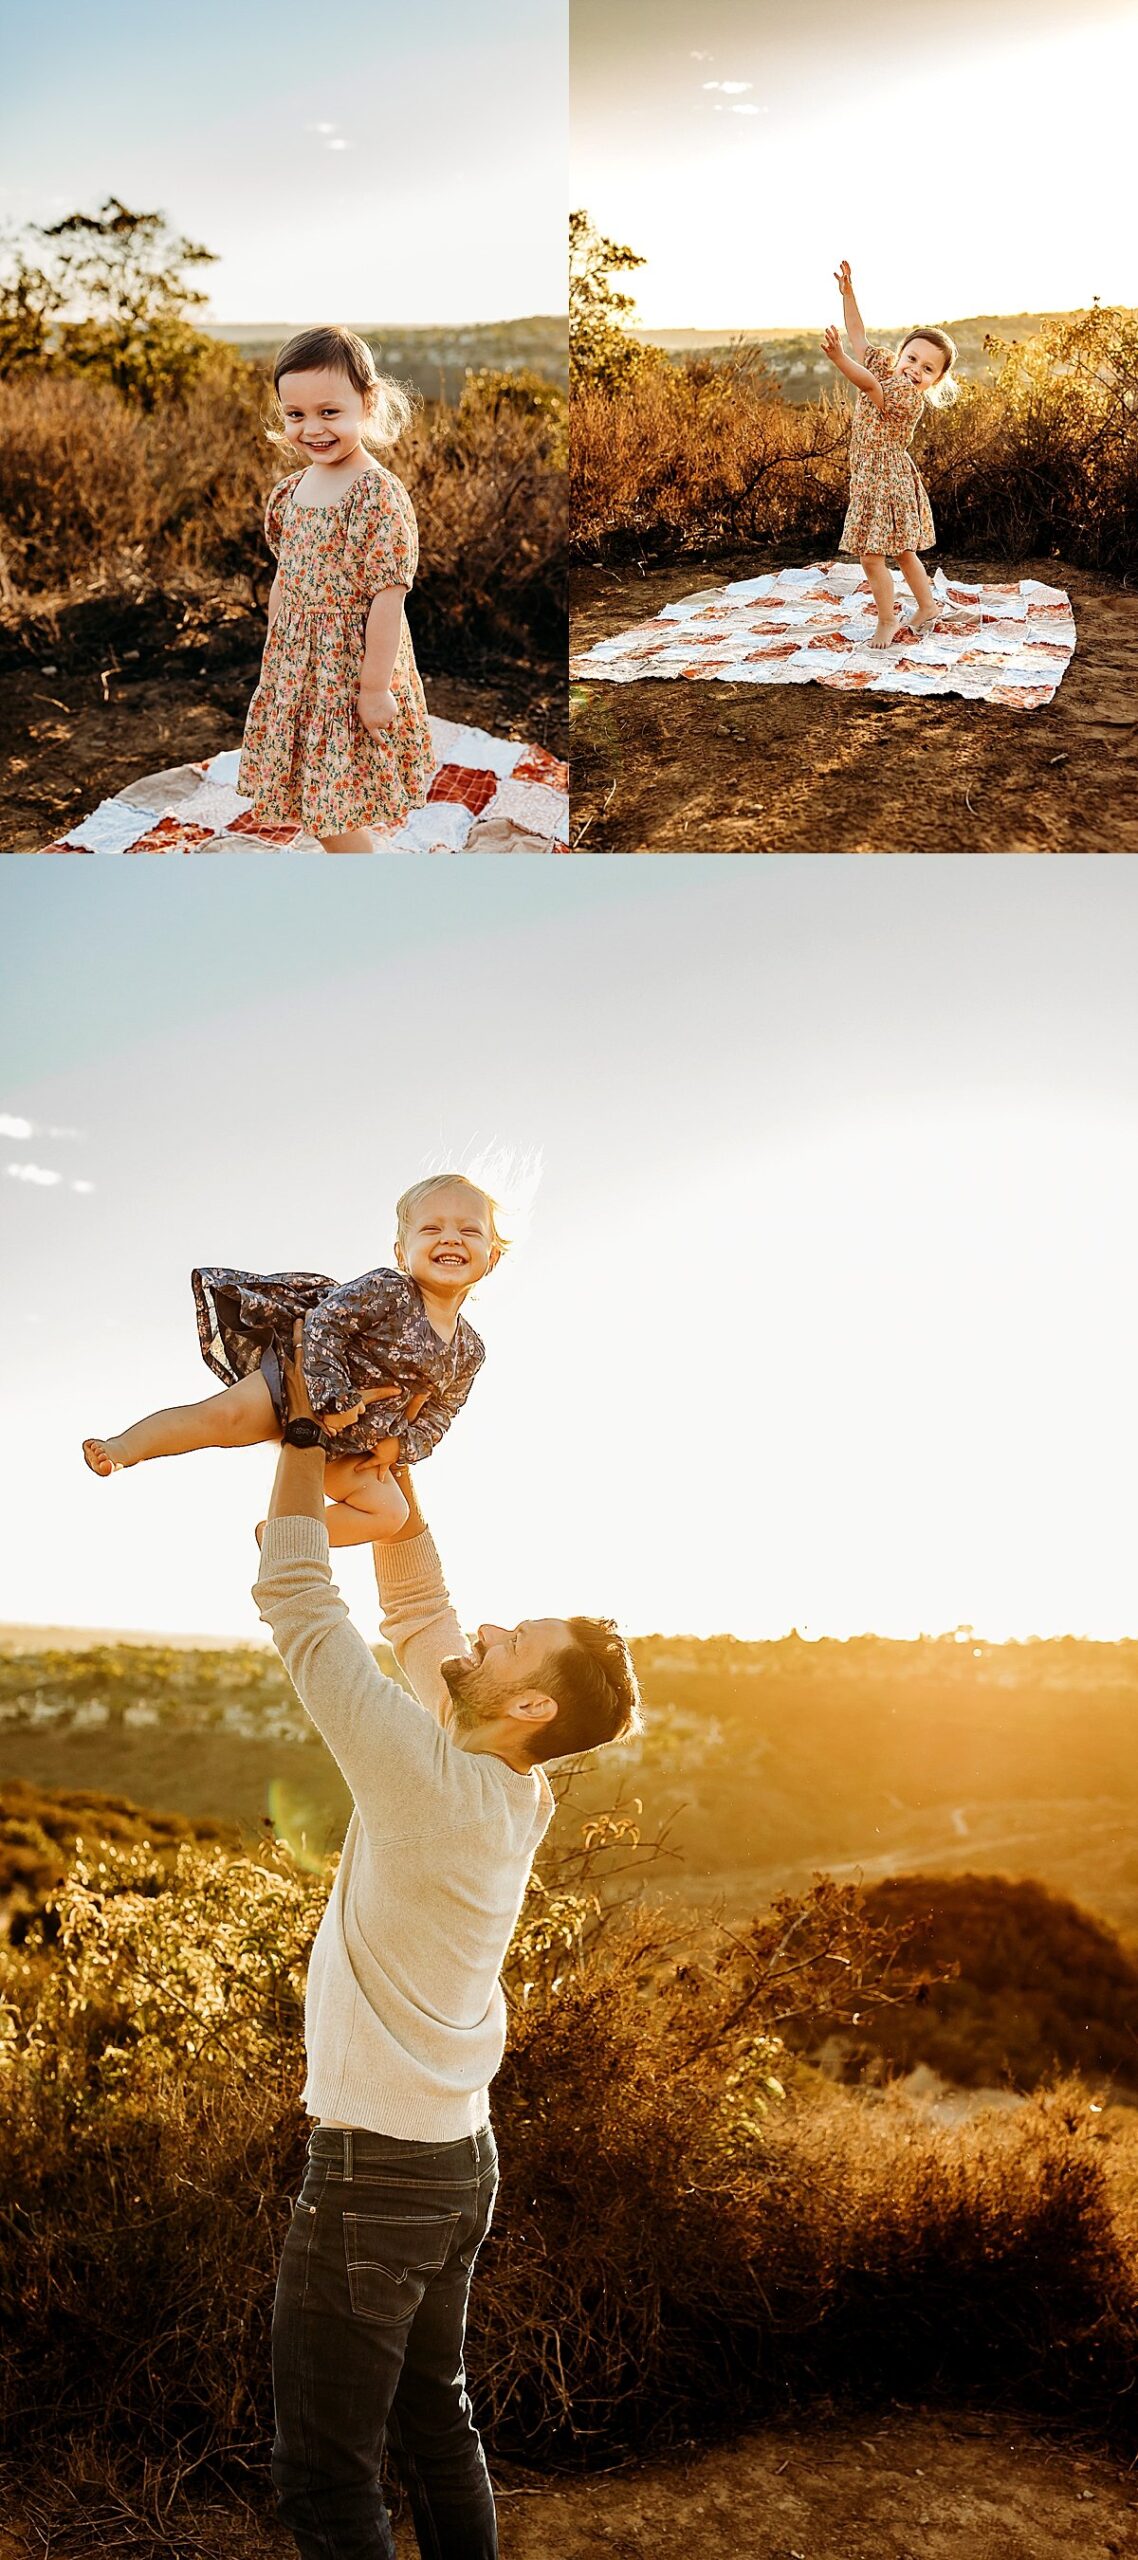  dad throwing daughter up into air wearing a blue floral dress by carlsbad family photographer 